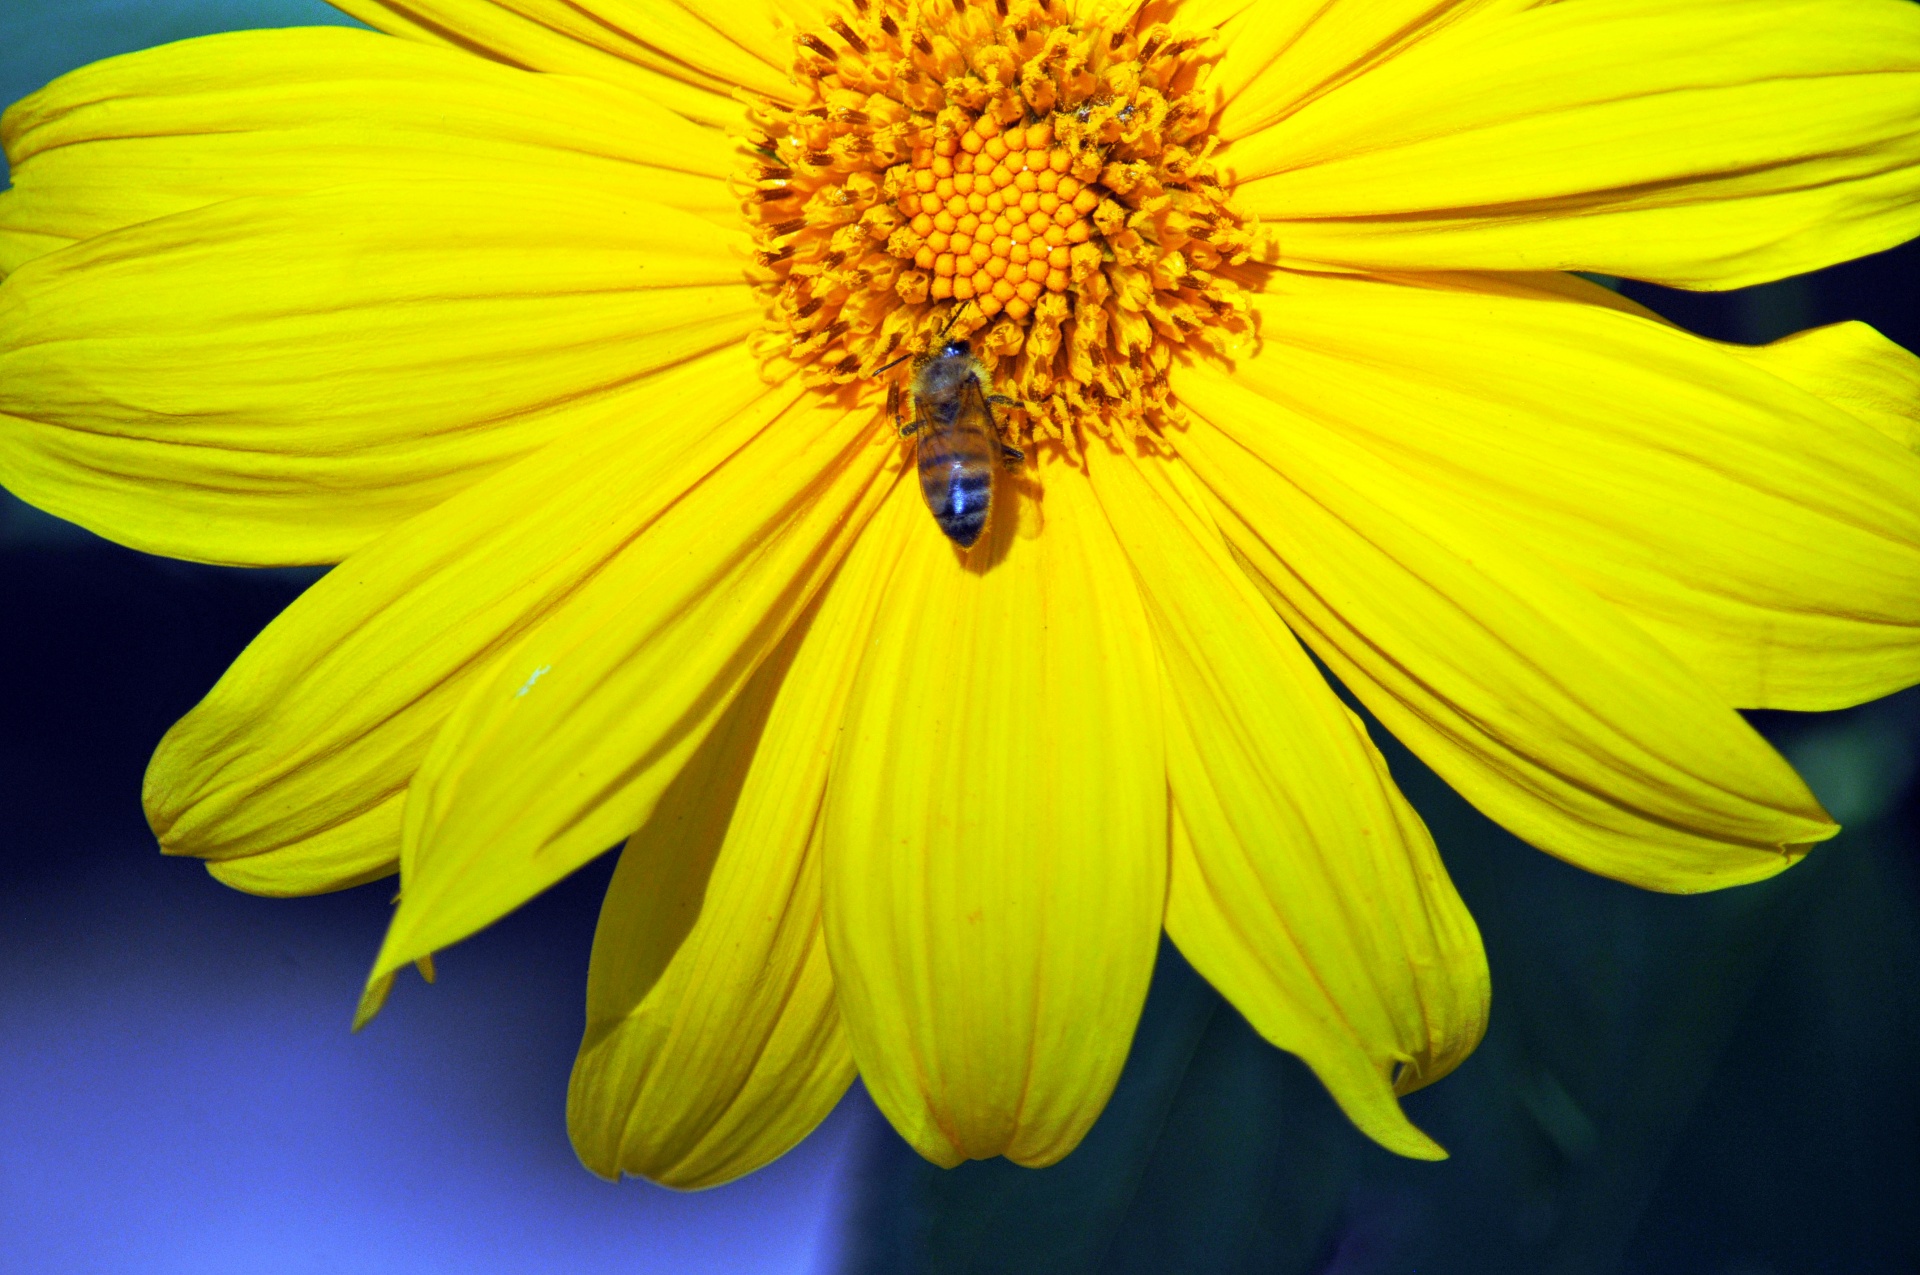 close up of a bumblebee in the center of a large yellow flower